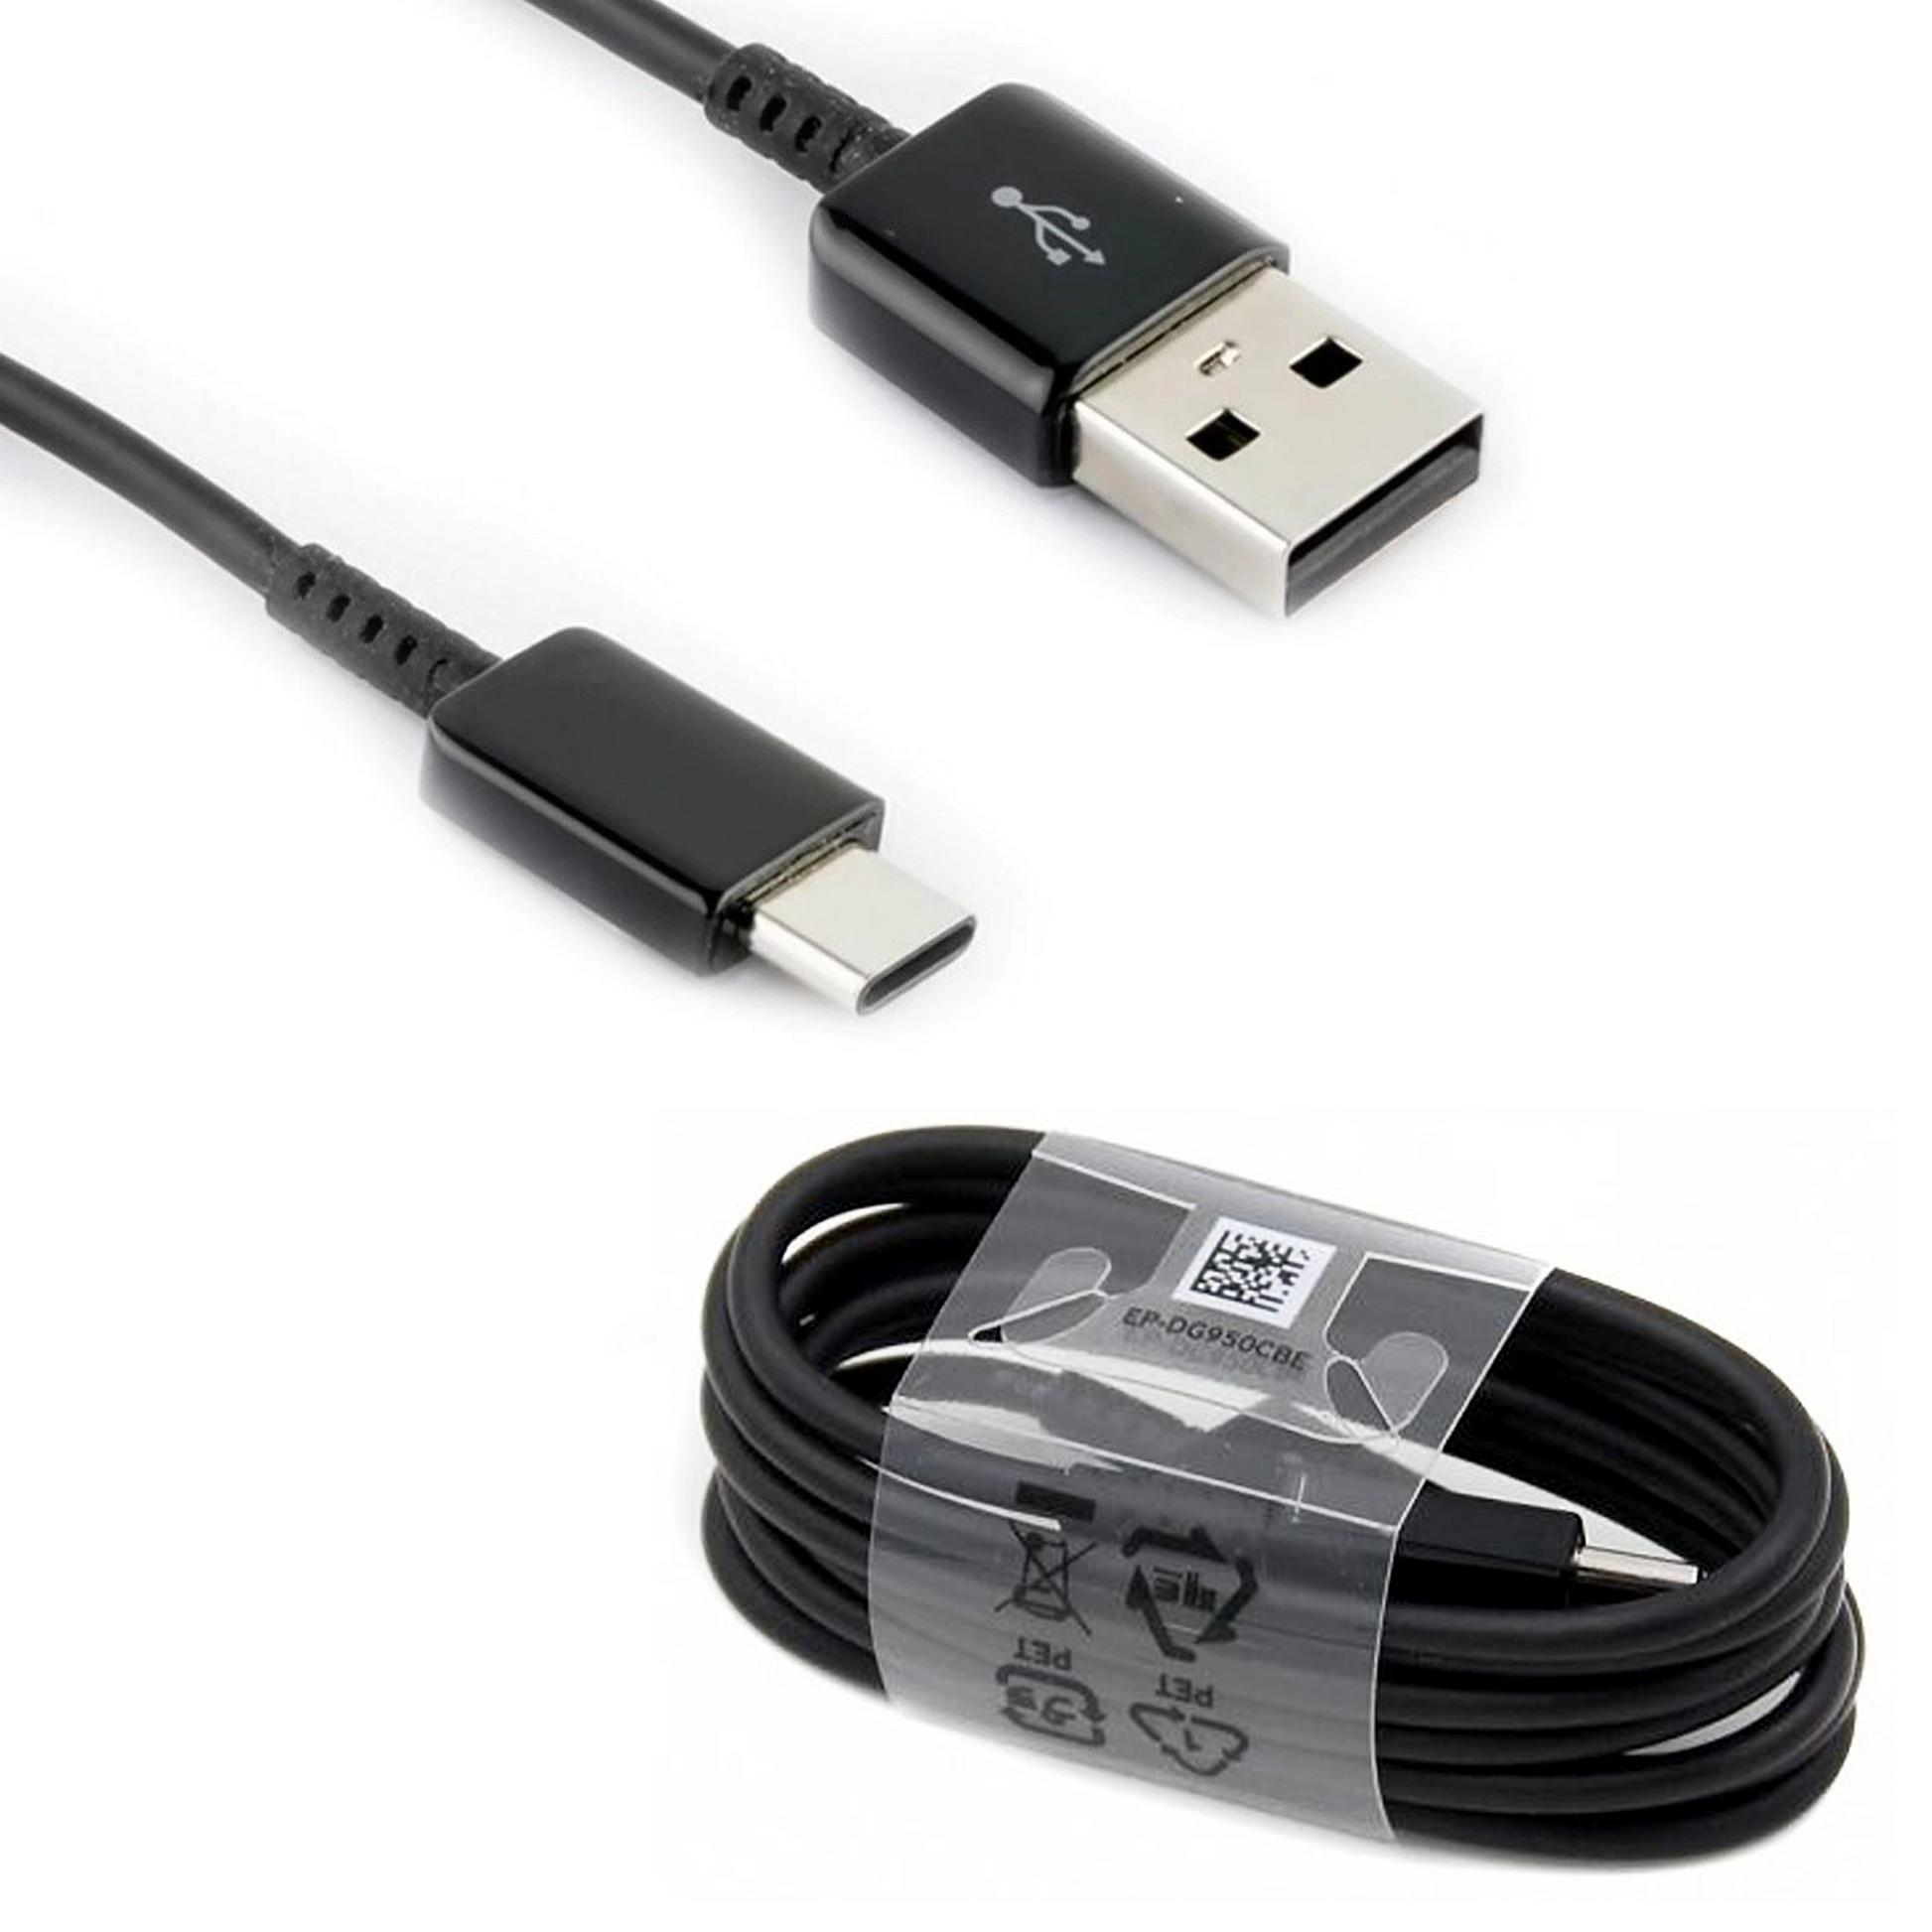 Samsung USB-C Data Charging Cable for Galaxy S9/S9+/Note 9/S8/S8+ - Black  EP-DG950CBE- 100% Original - Bulk Packaging